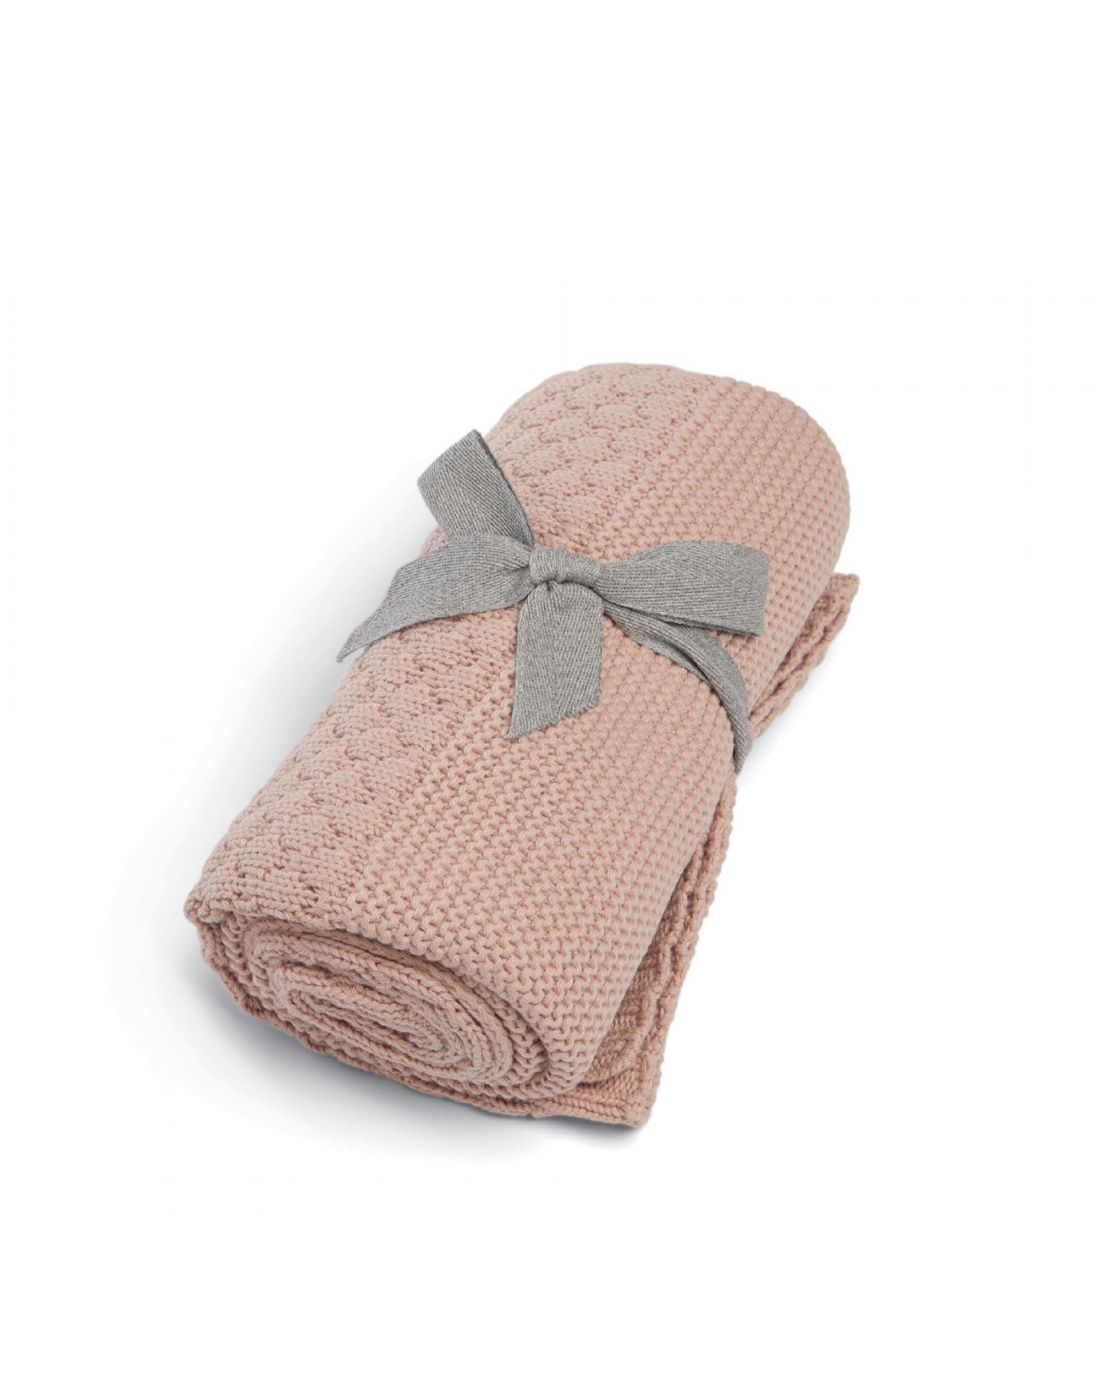 Mamas & Papas Knitted Blanket Welcome to the World Seedling Pink